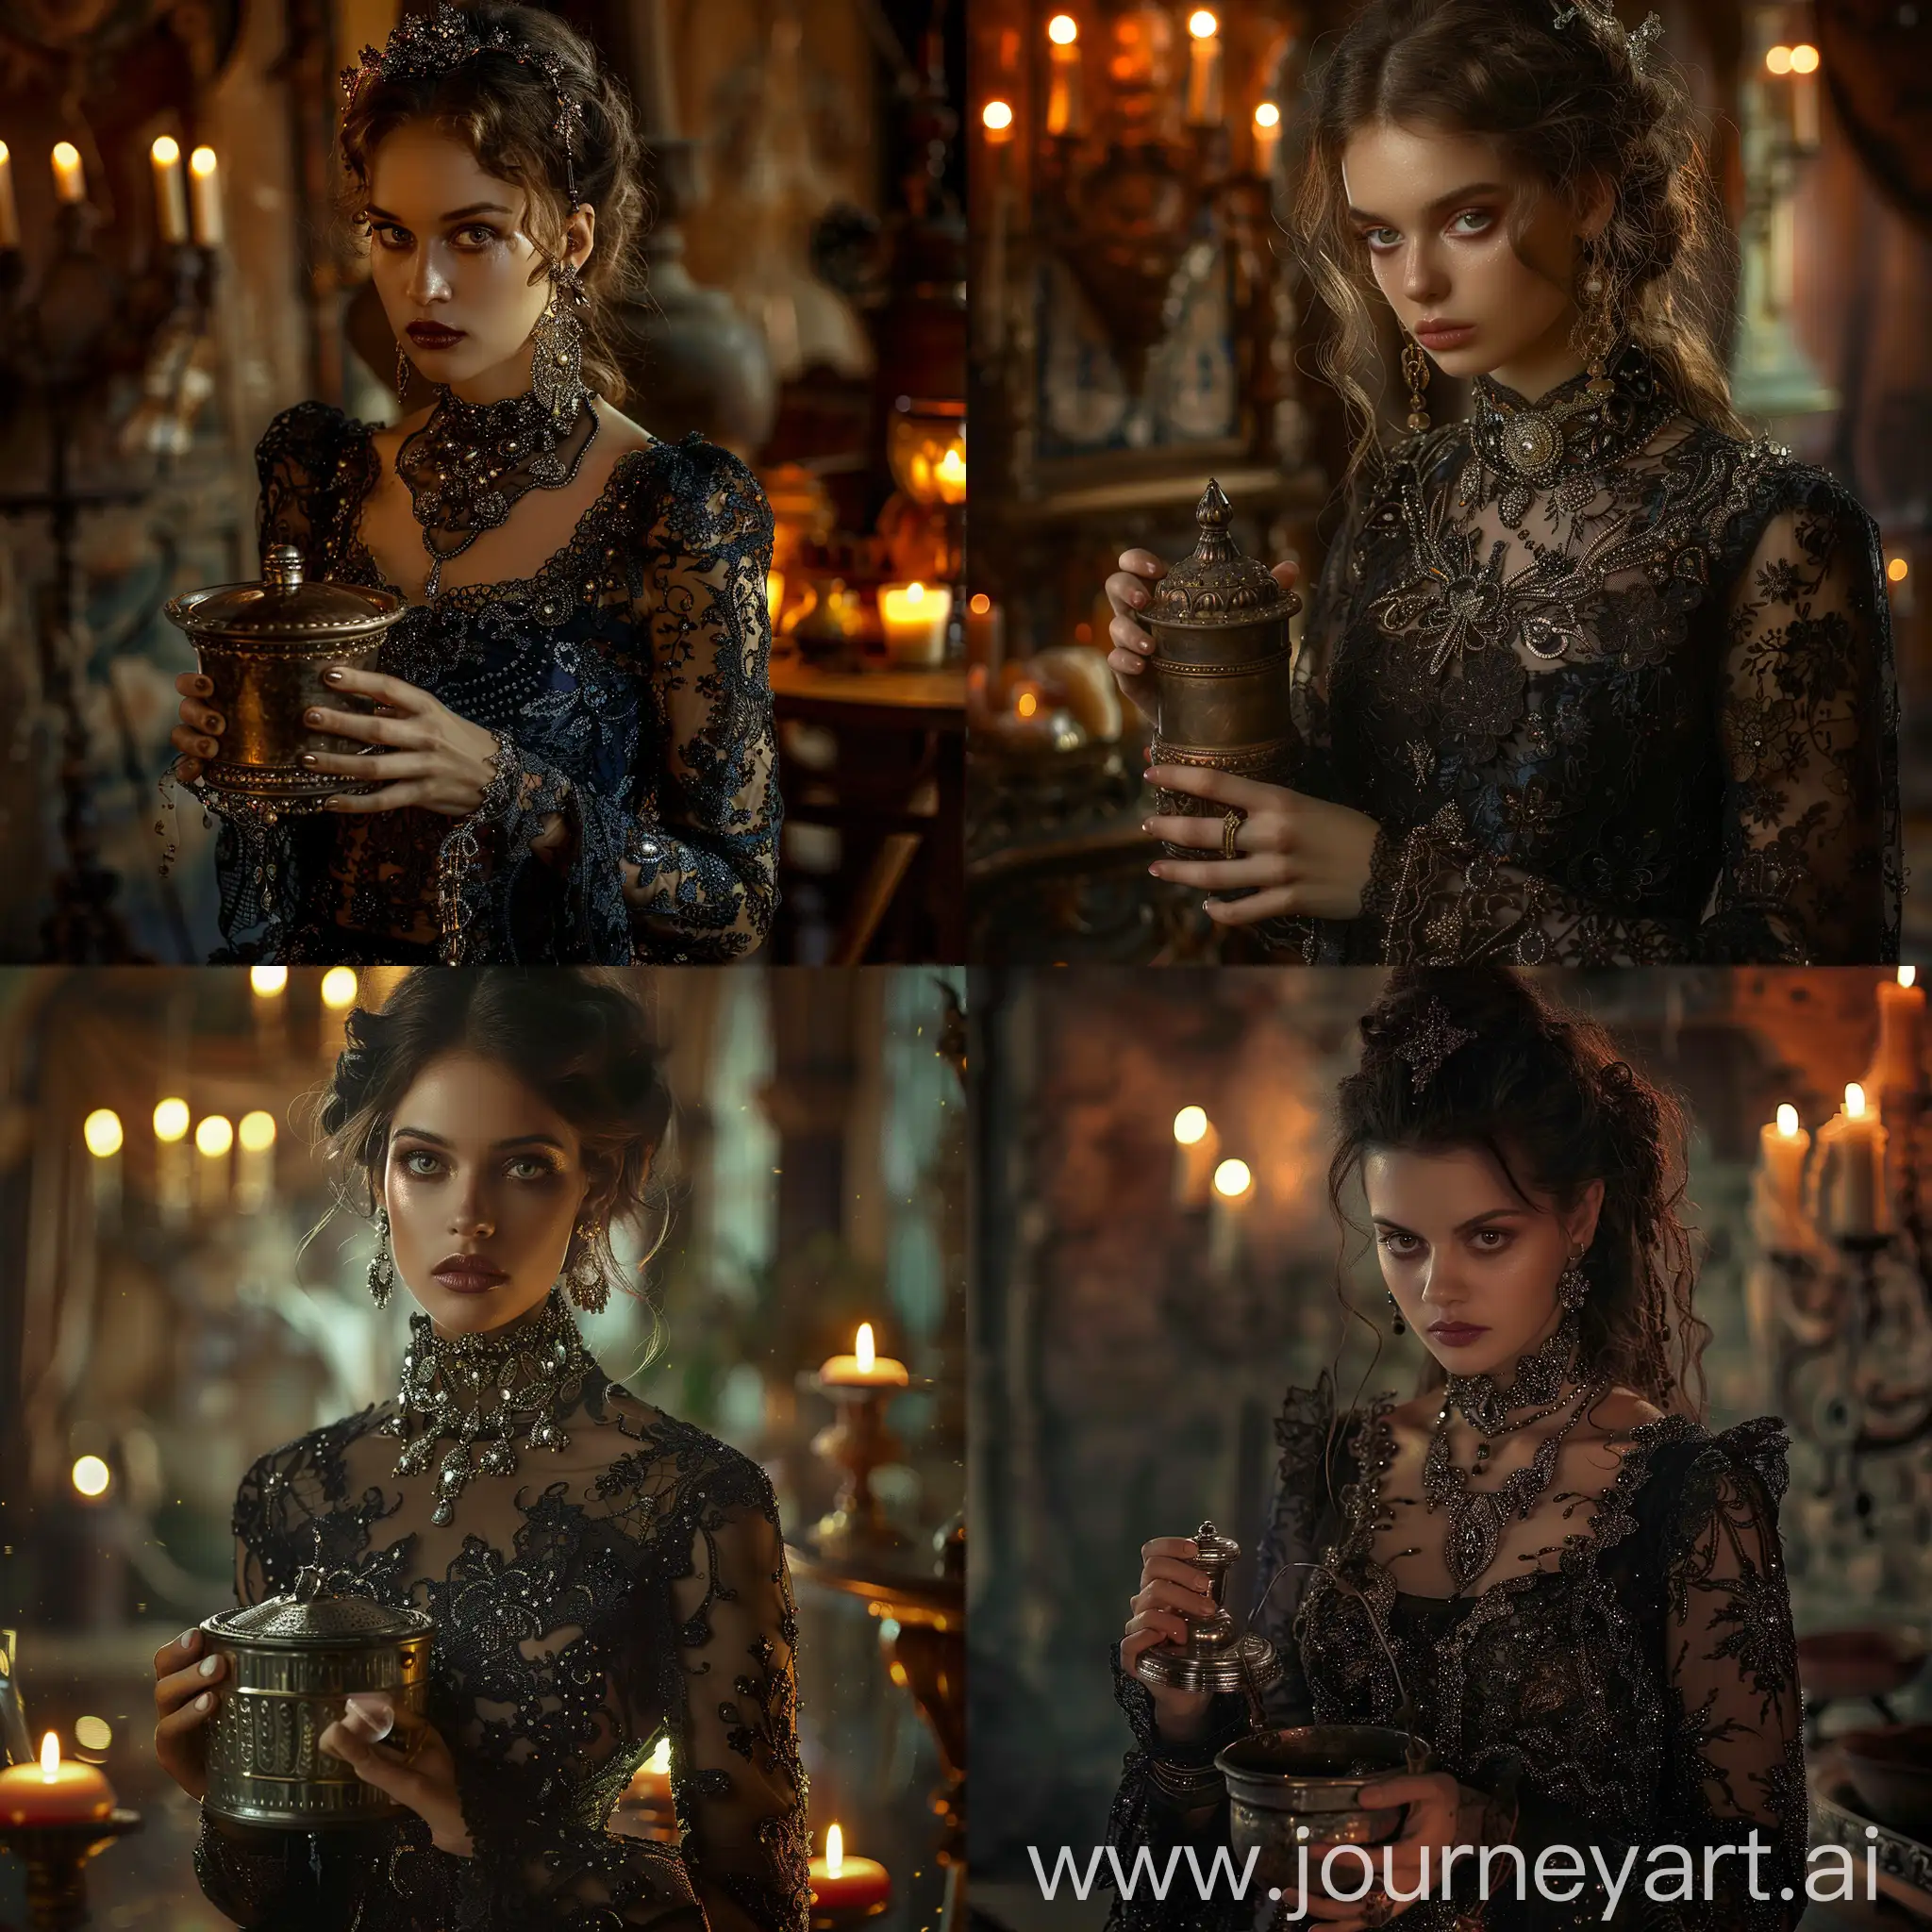 A woman with a pensive expression, dressed in a dark lace gown with intricate beading and jewelry, holding a metal container in a dimly lit, candle-lit setting, in the style of a dramatic, moody portrait.